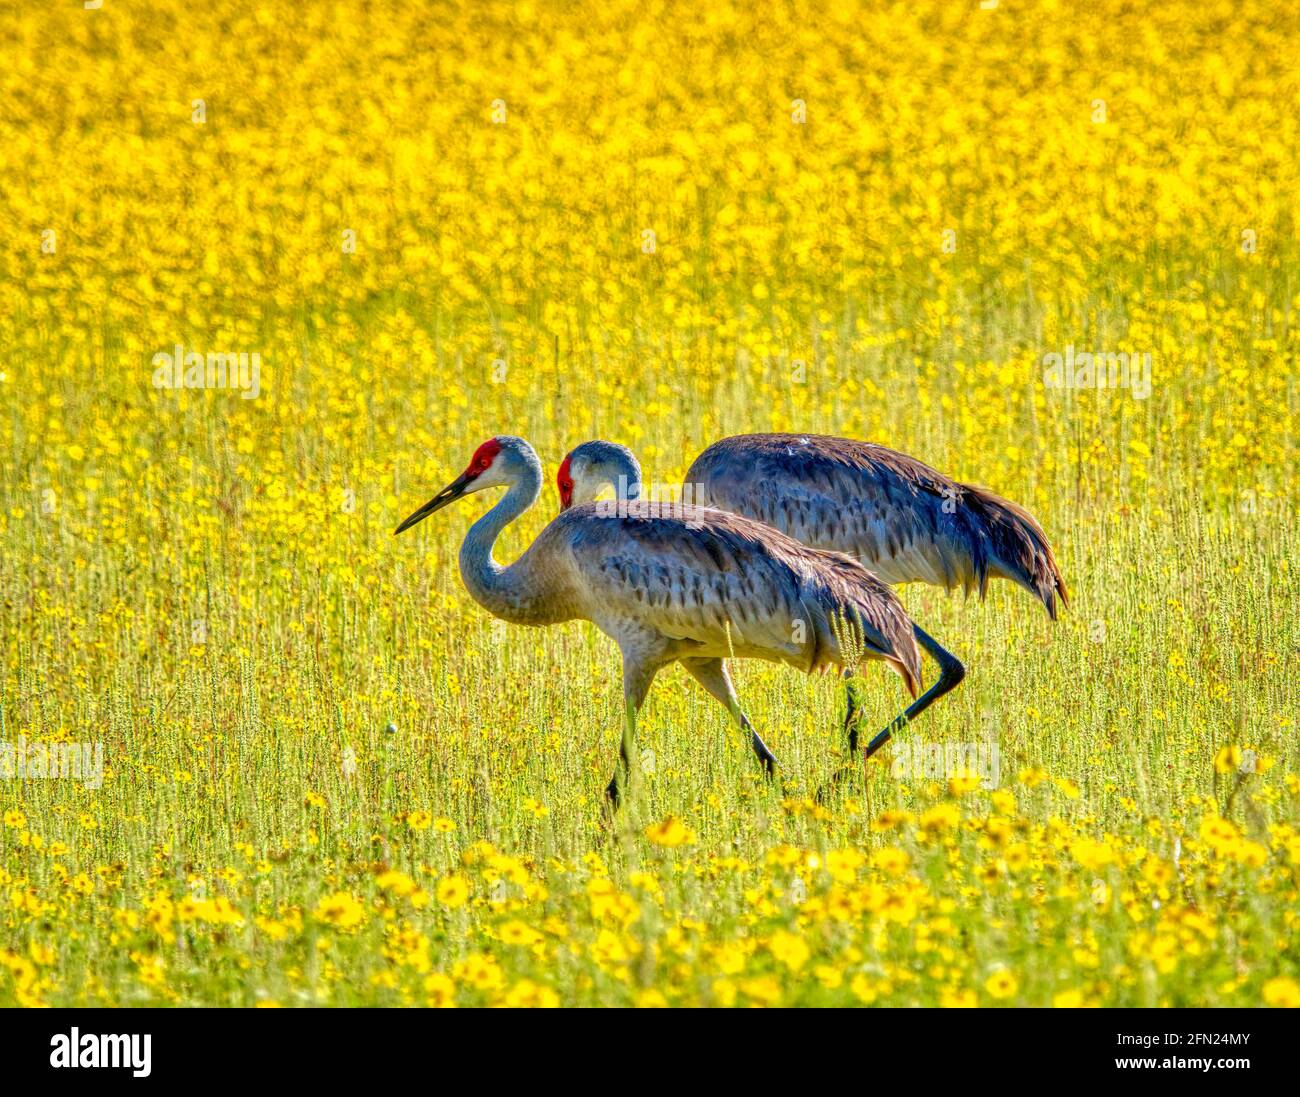 Sandhill Cranes in the  Coreopsis or Tickseed wildflowers in  the Big Flats area of Myakka River State Park in Sarasota Florida USA Stock Photo